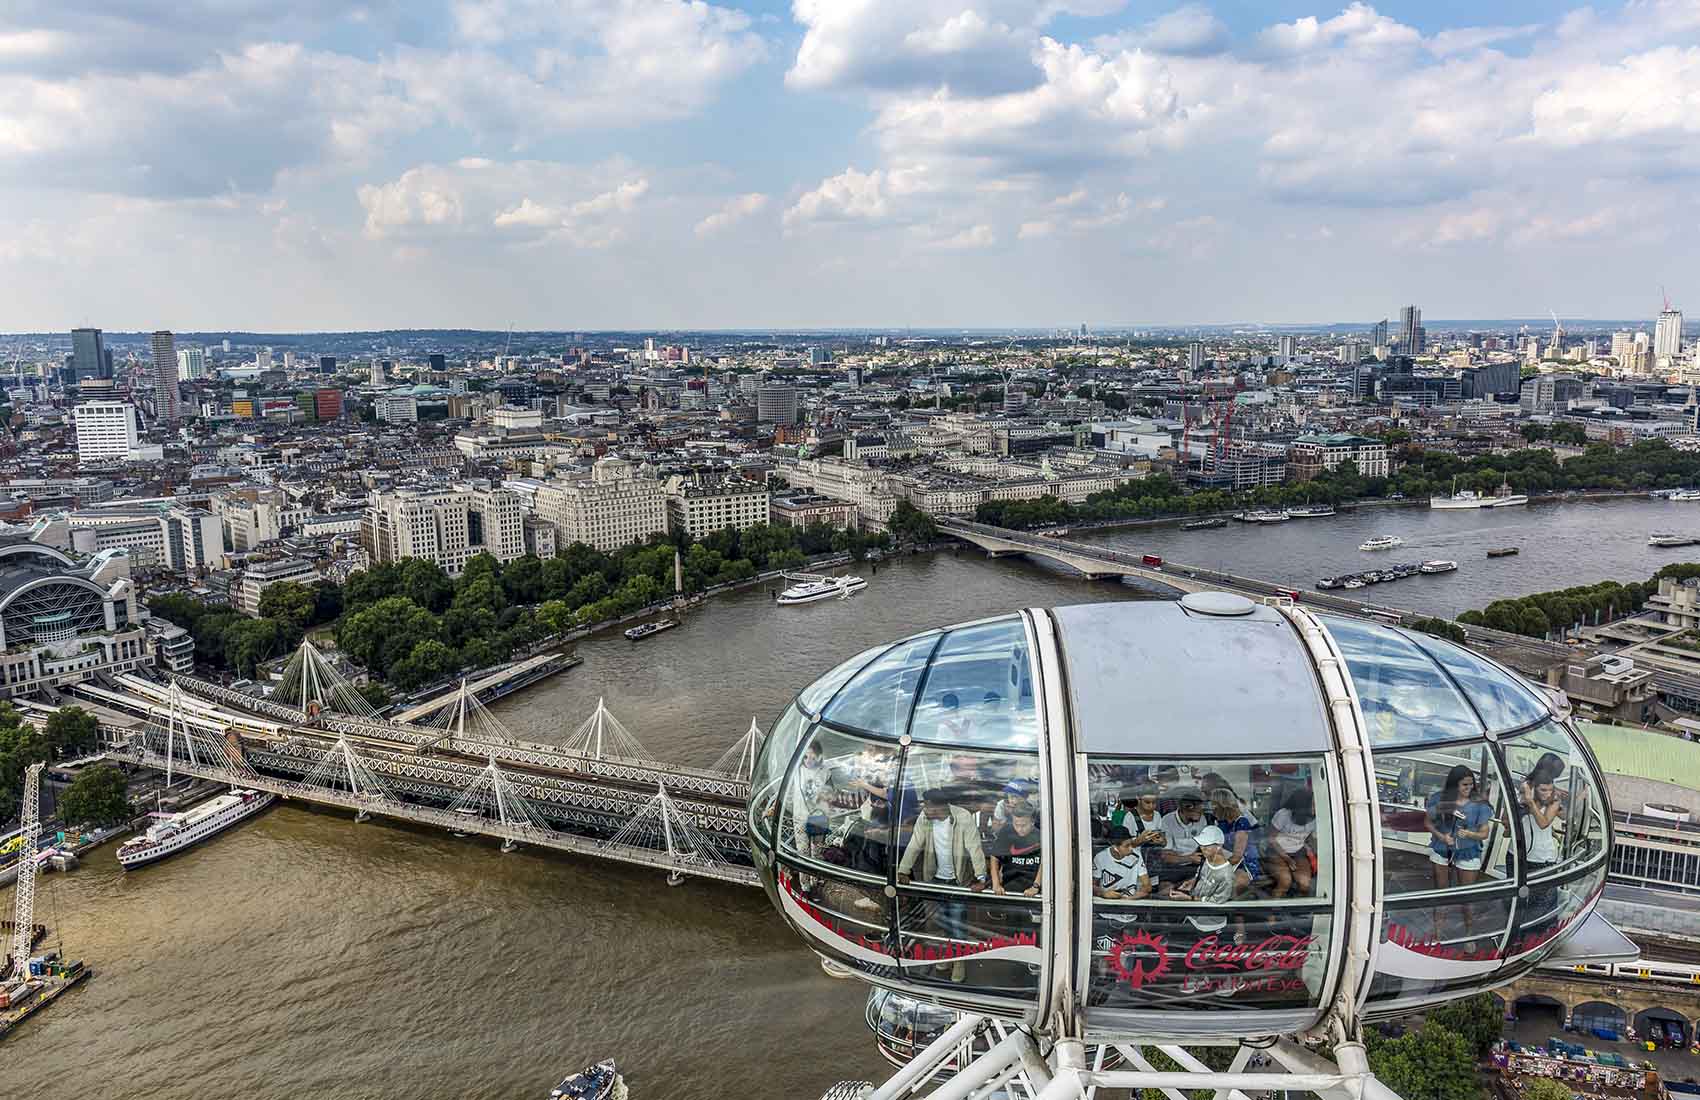 A view from the London Eye.